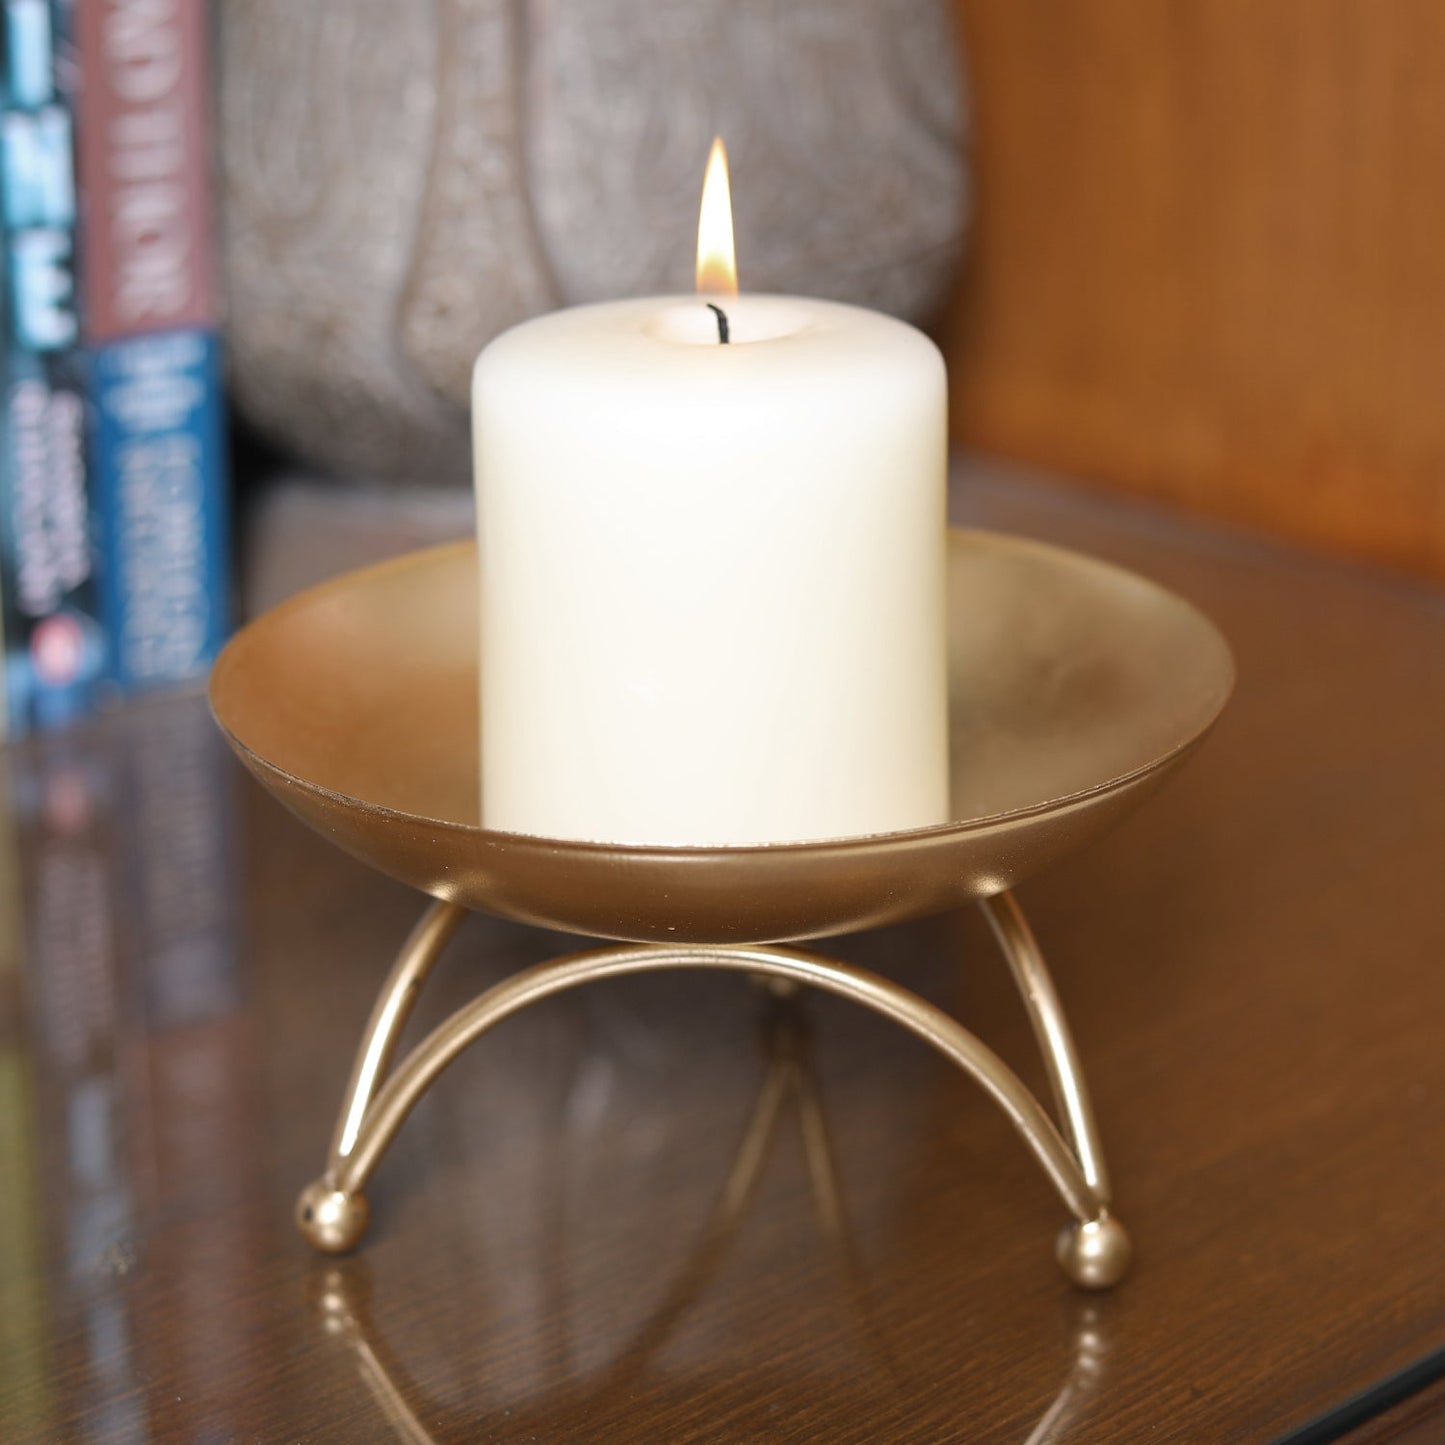 Hosley Decorative Pillar  Candle Holder with 1 pillar candle for Home Decoration, Pack of 1, Gold